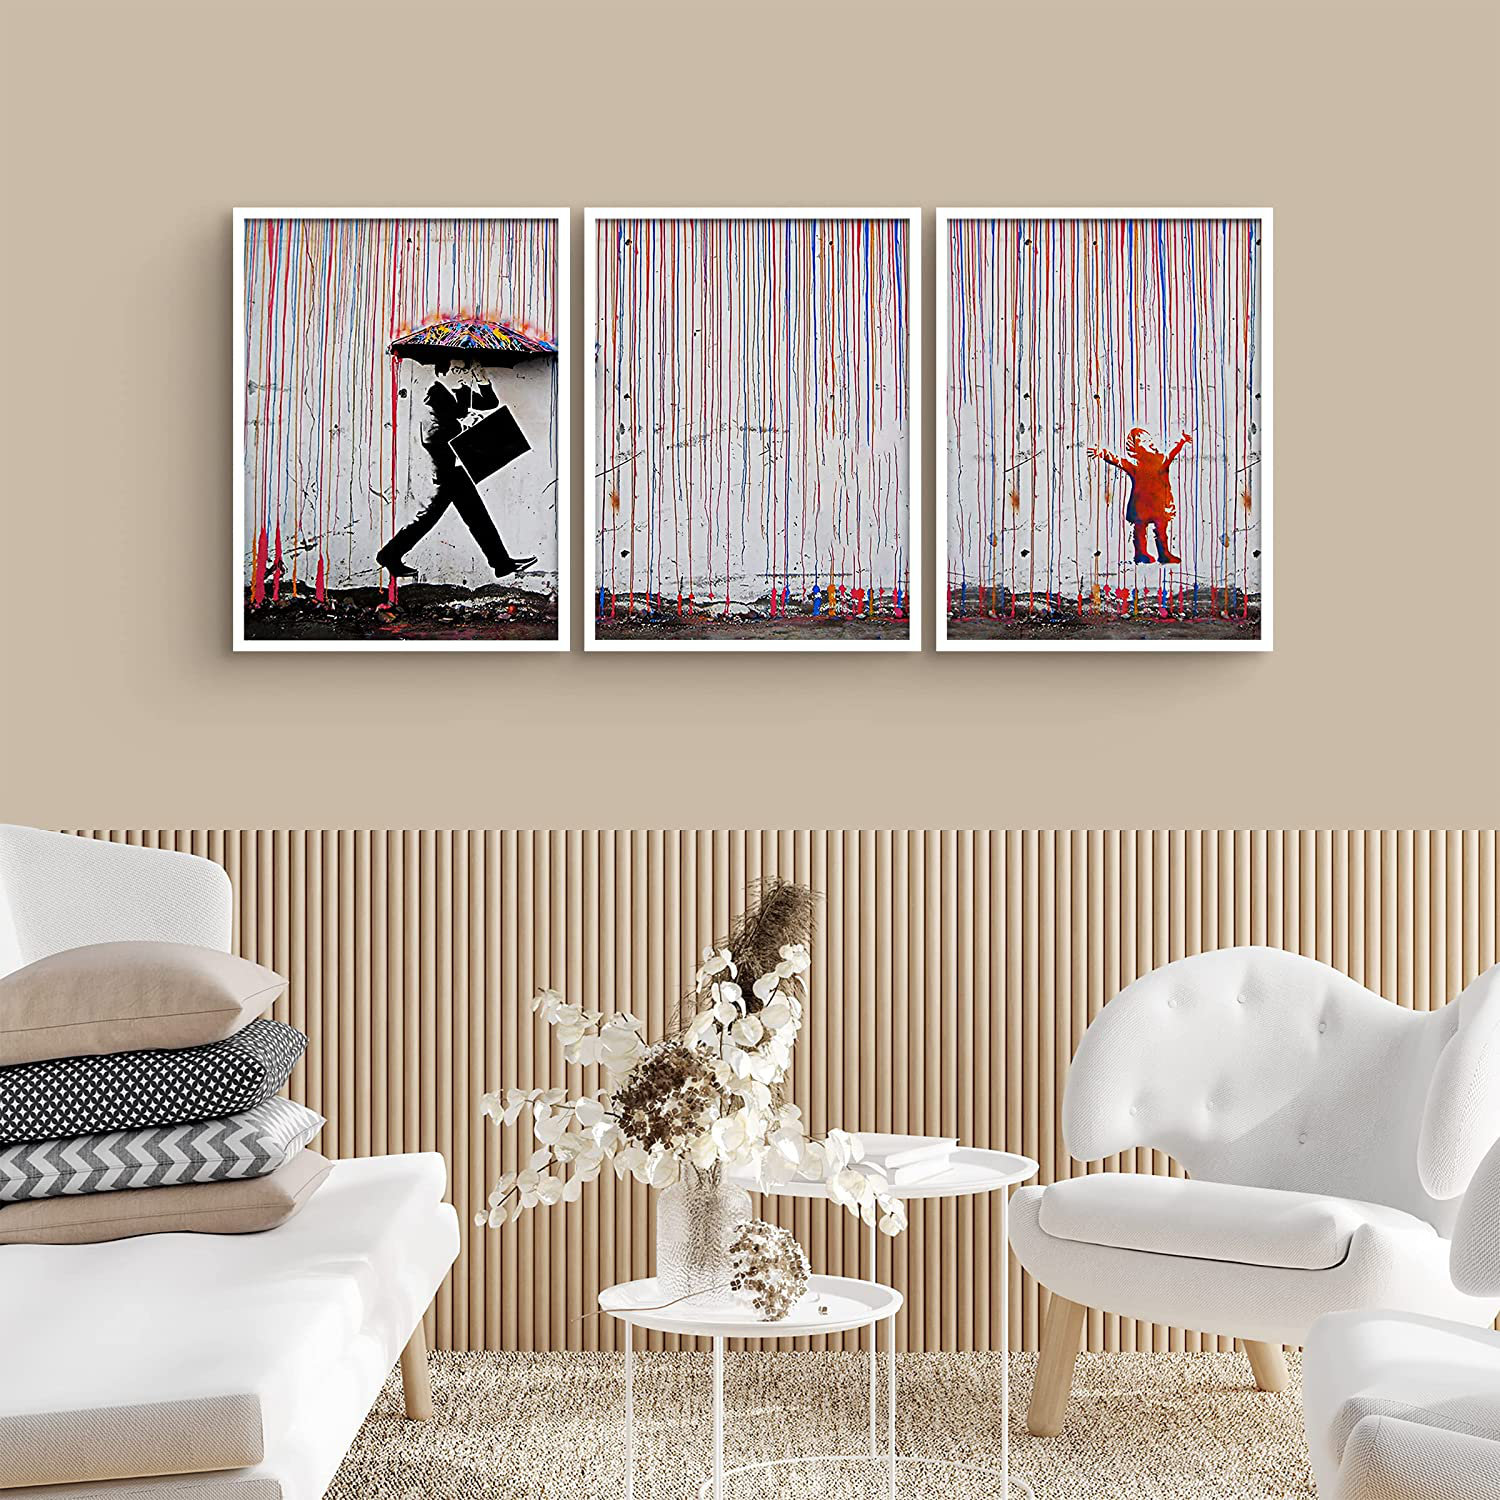 Banksy Inspired Rainbow Rain Explosion on London Street - 3 Piece Picture Frame Graphic Art SIGNLEADER Format: White Framed